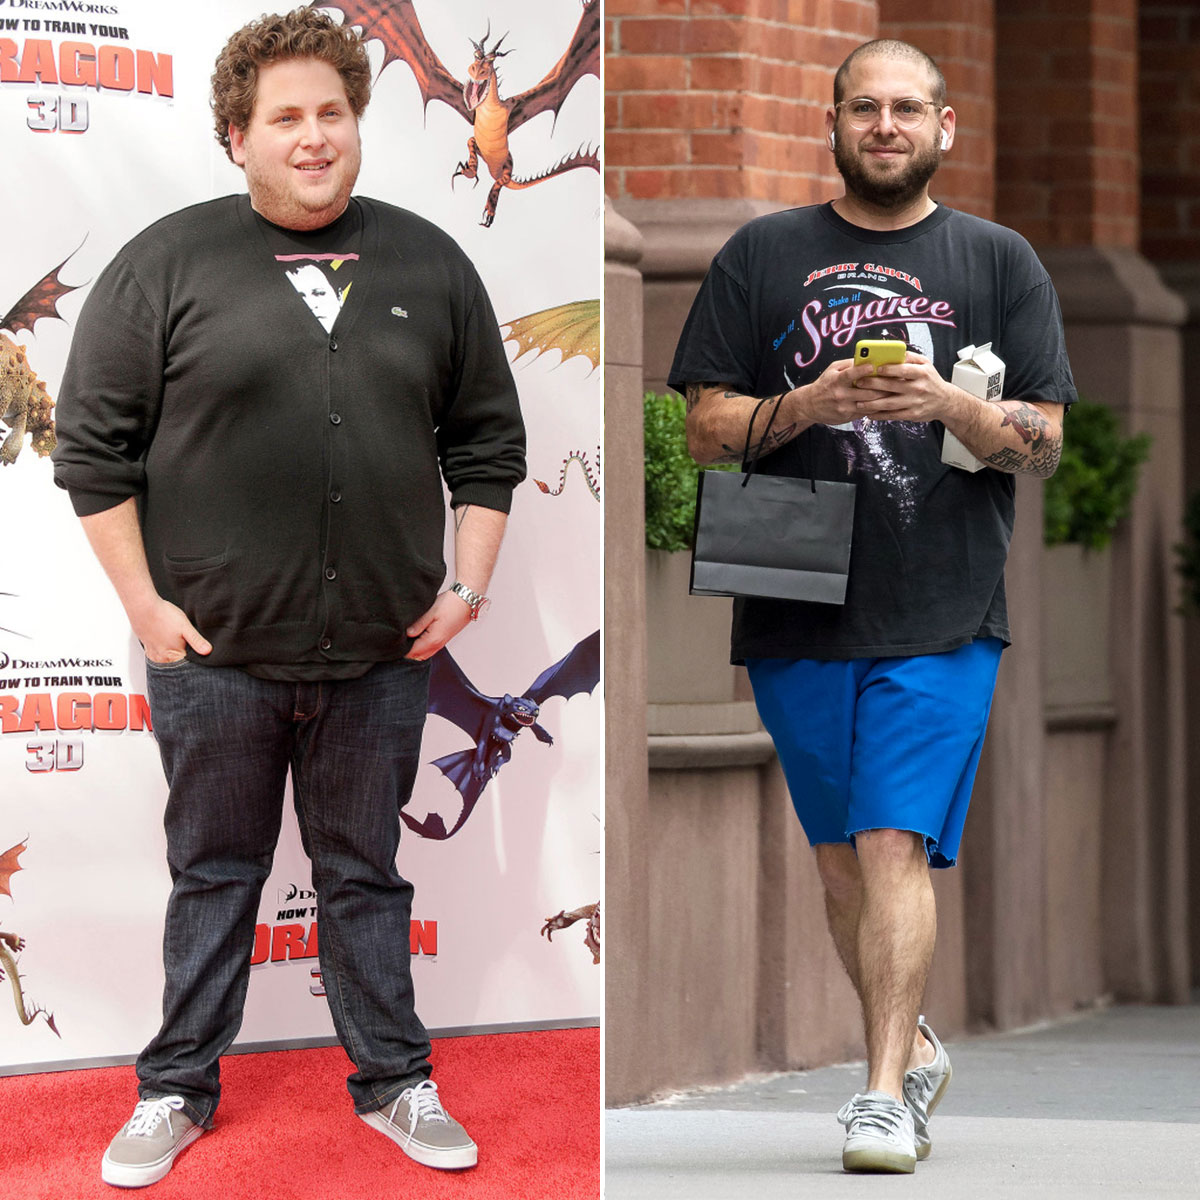 Fantastic 90s - Jonah Hill Then and Now. It's almost